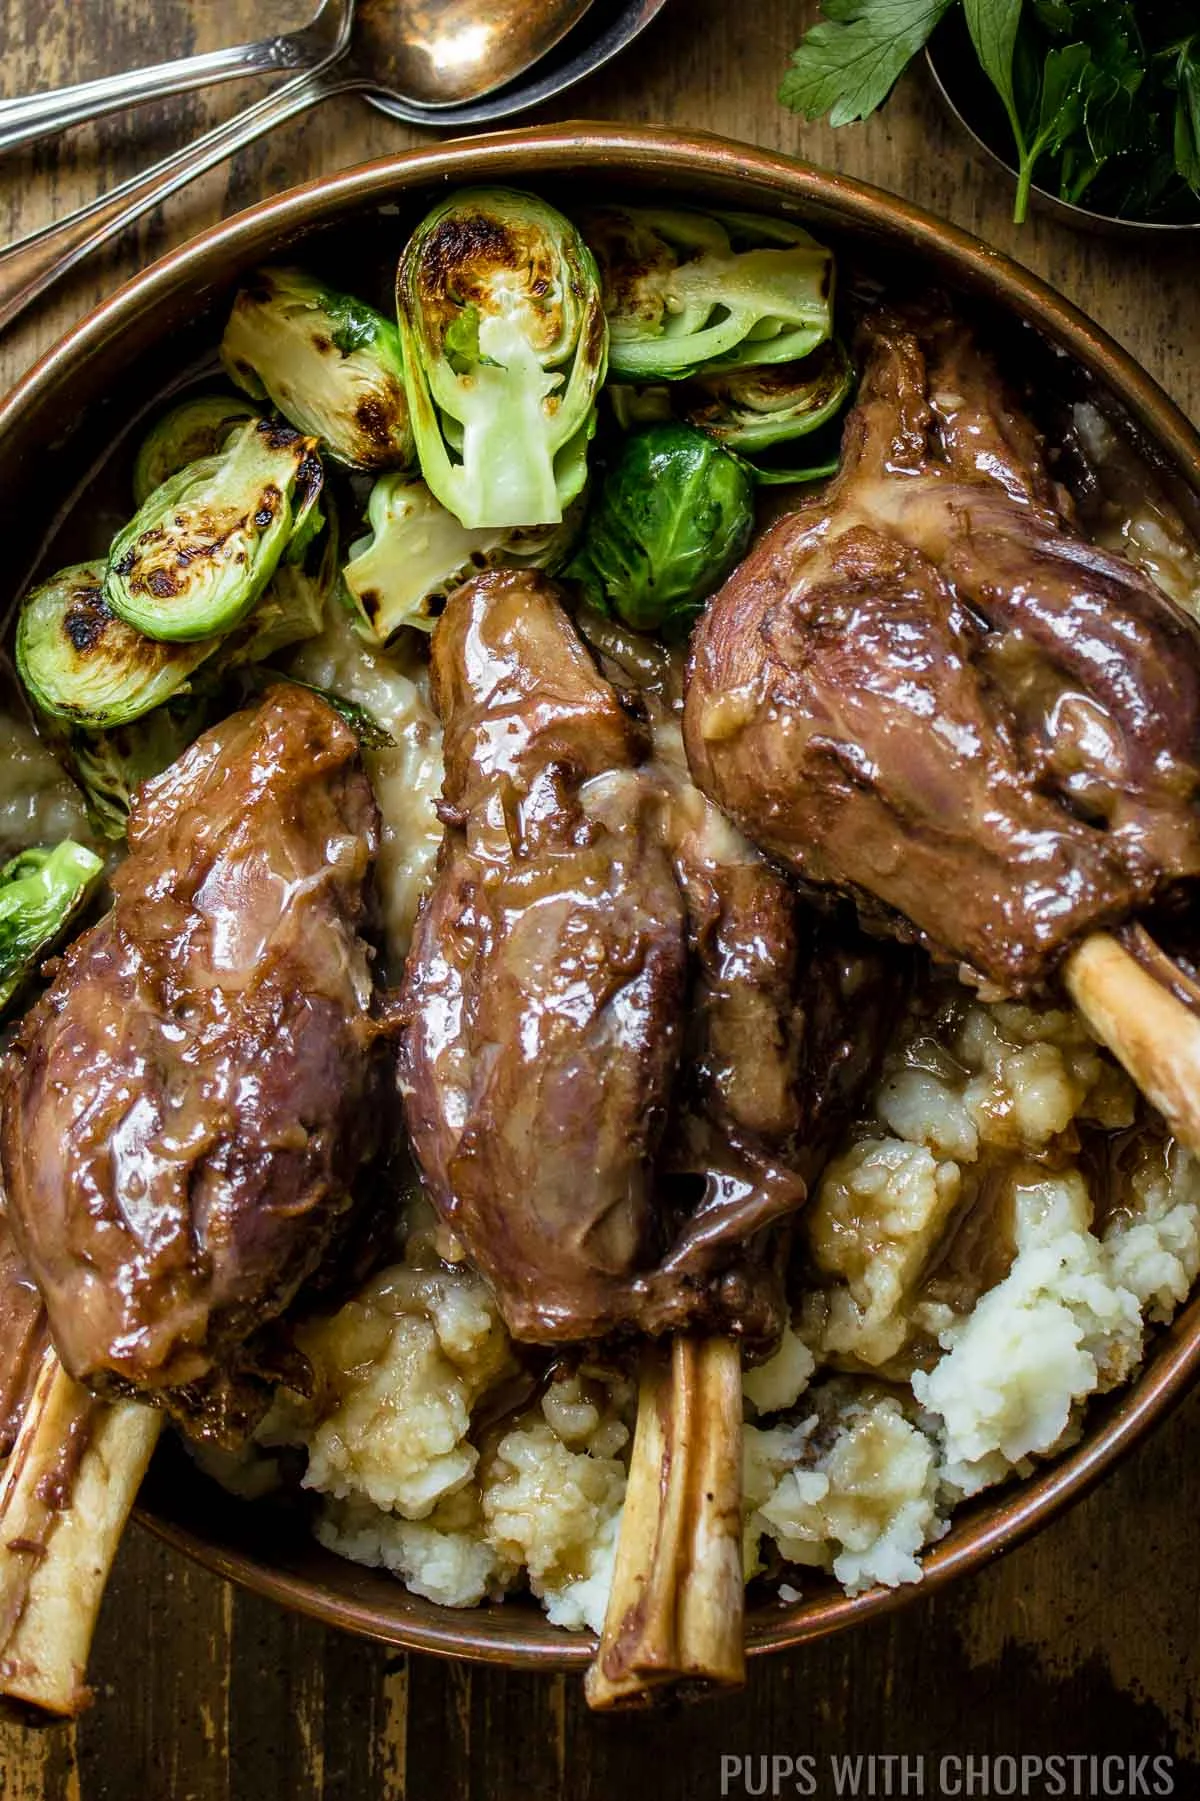 Braised lamb shanks with red wine, and miso served with brussel sprouts and mashed potatoes.